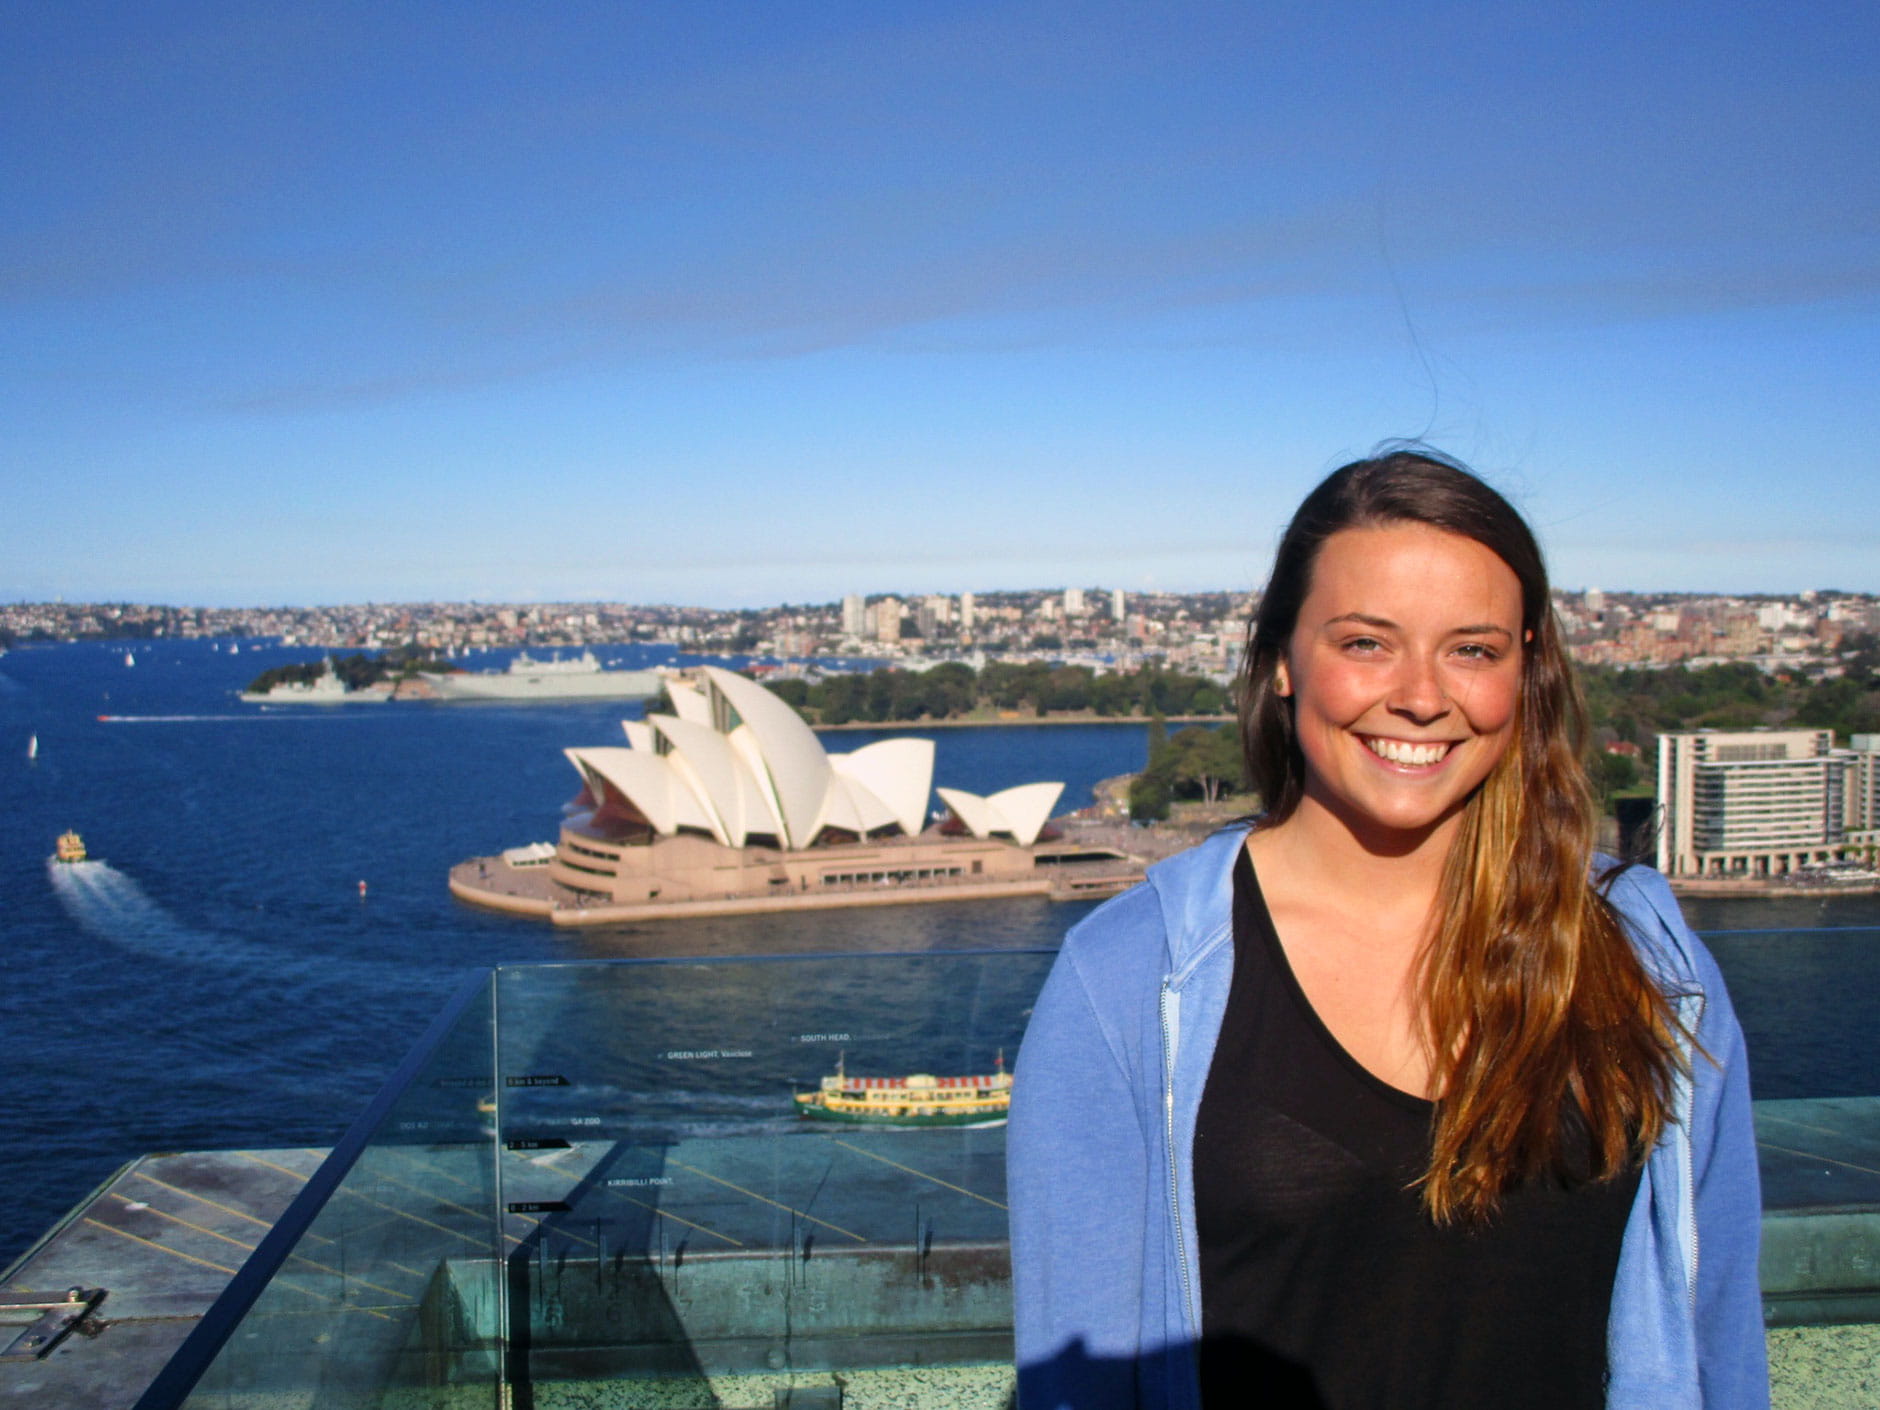 Student posing with the Sydney Opera House in the background